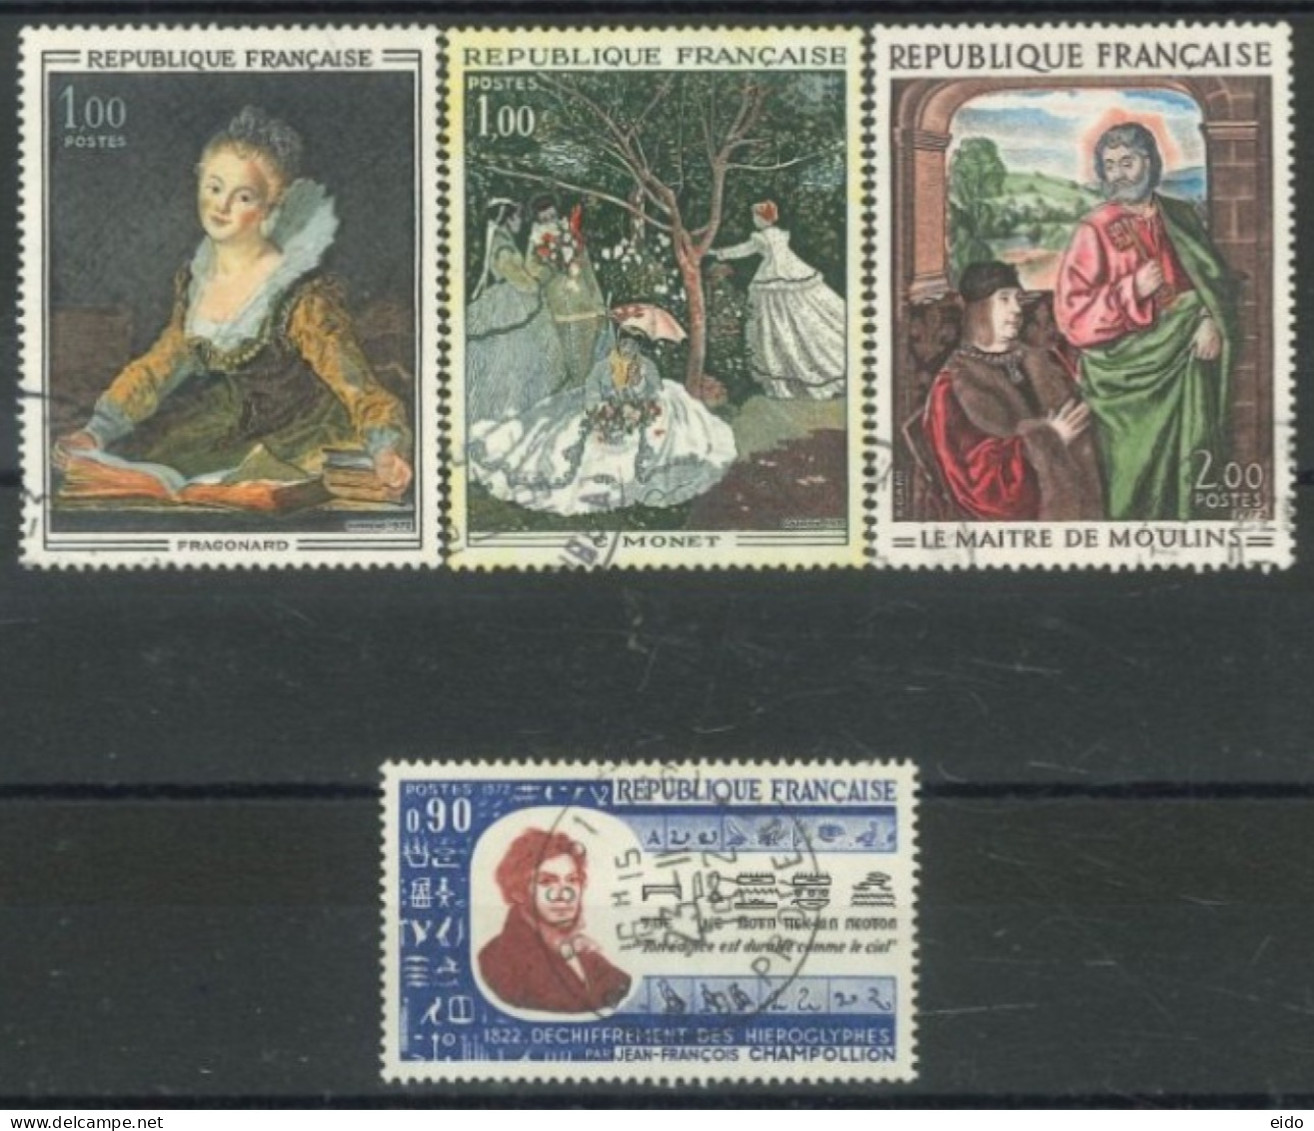 FRANCE - 1972, INTAGLIO WORKS OF ART IN LACE & 150th ANNIV OF JEAN FRANCOIS HIEROGLYPHS STAMPS SET OF 4, USED - Used Stamps